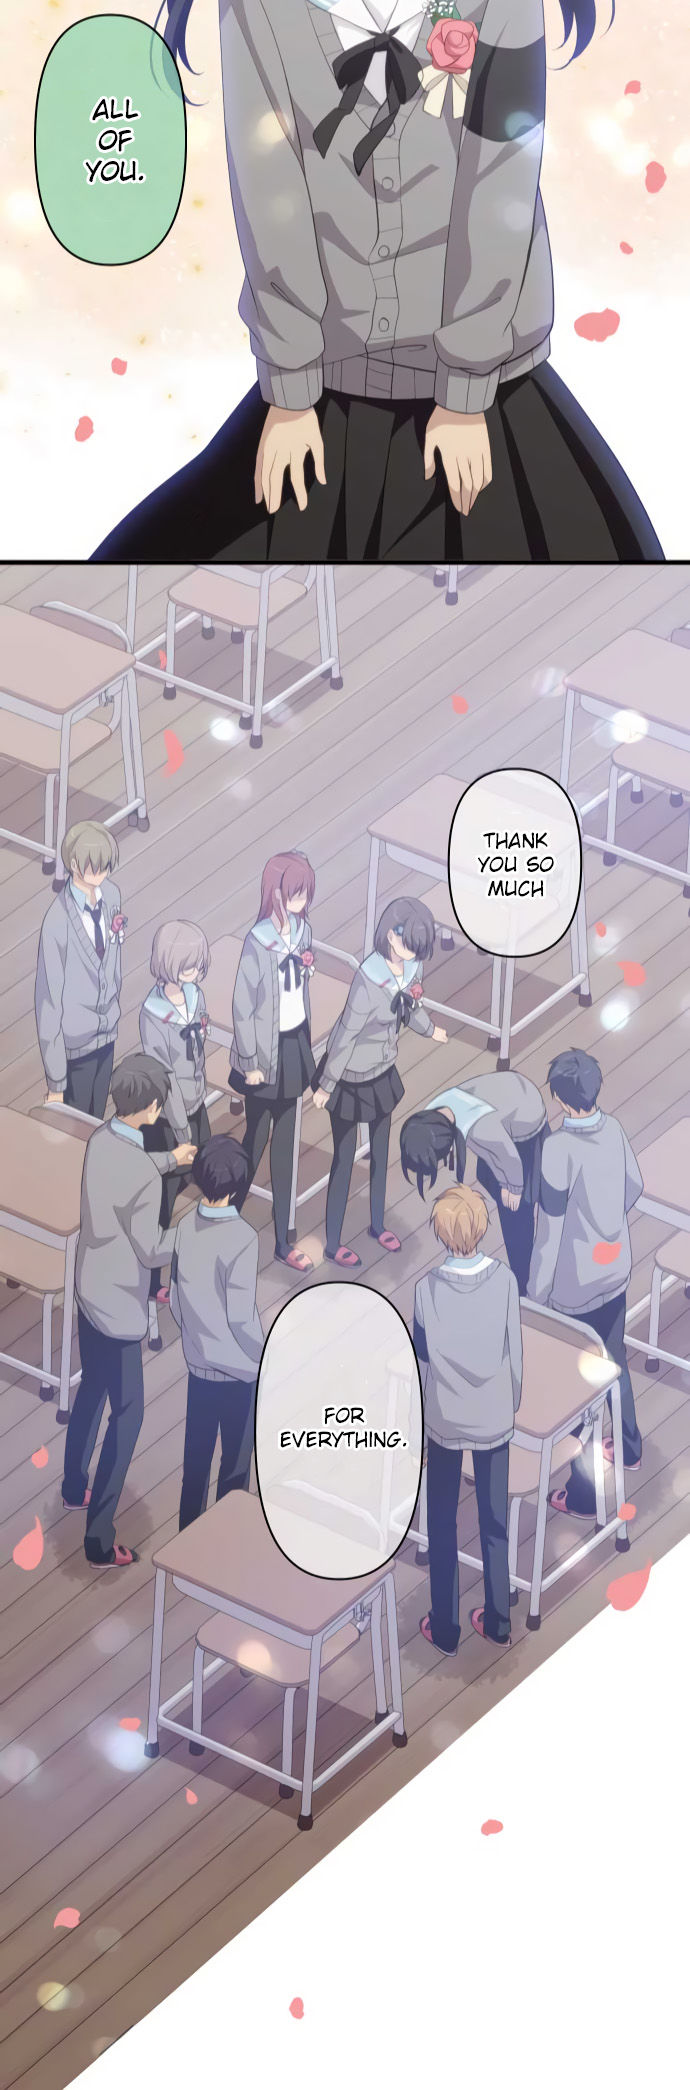 Relife 211 22